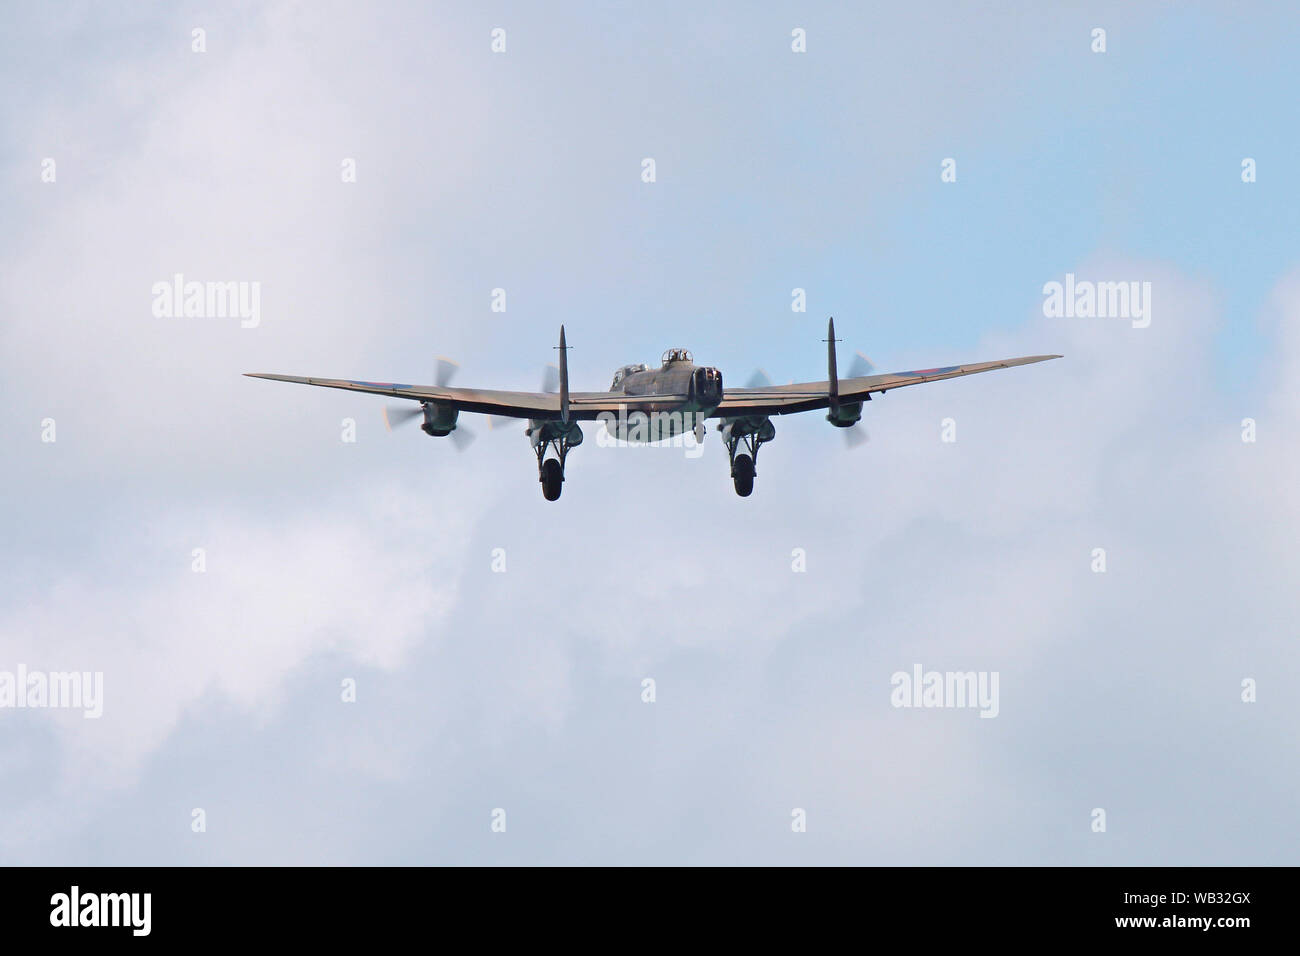 A tail view of the Avro Lancaster belonging to the Battle of Britain Memorial Flight. The aircraft has its undercarriage down. Stock Photo